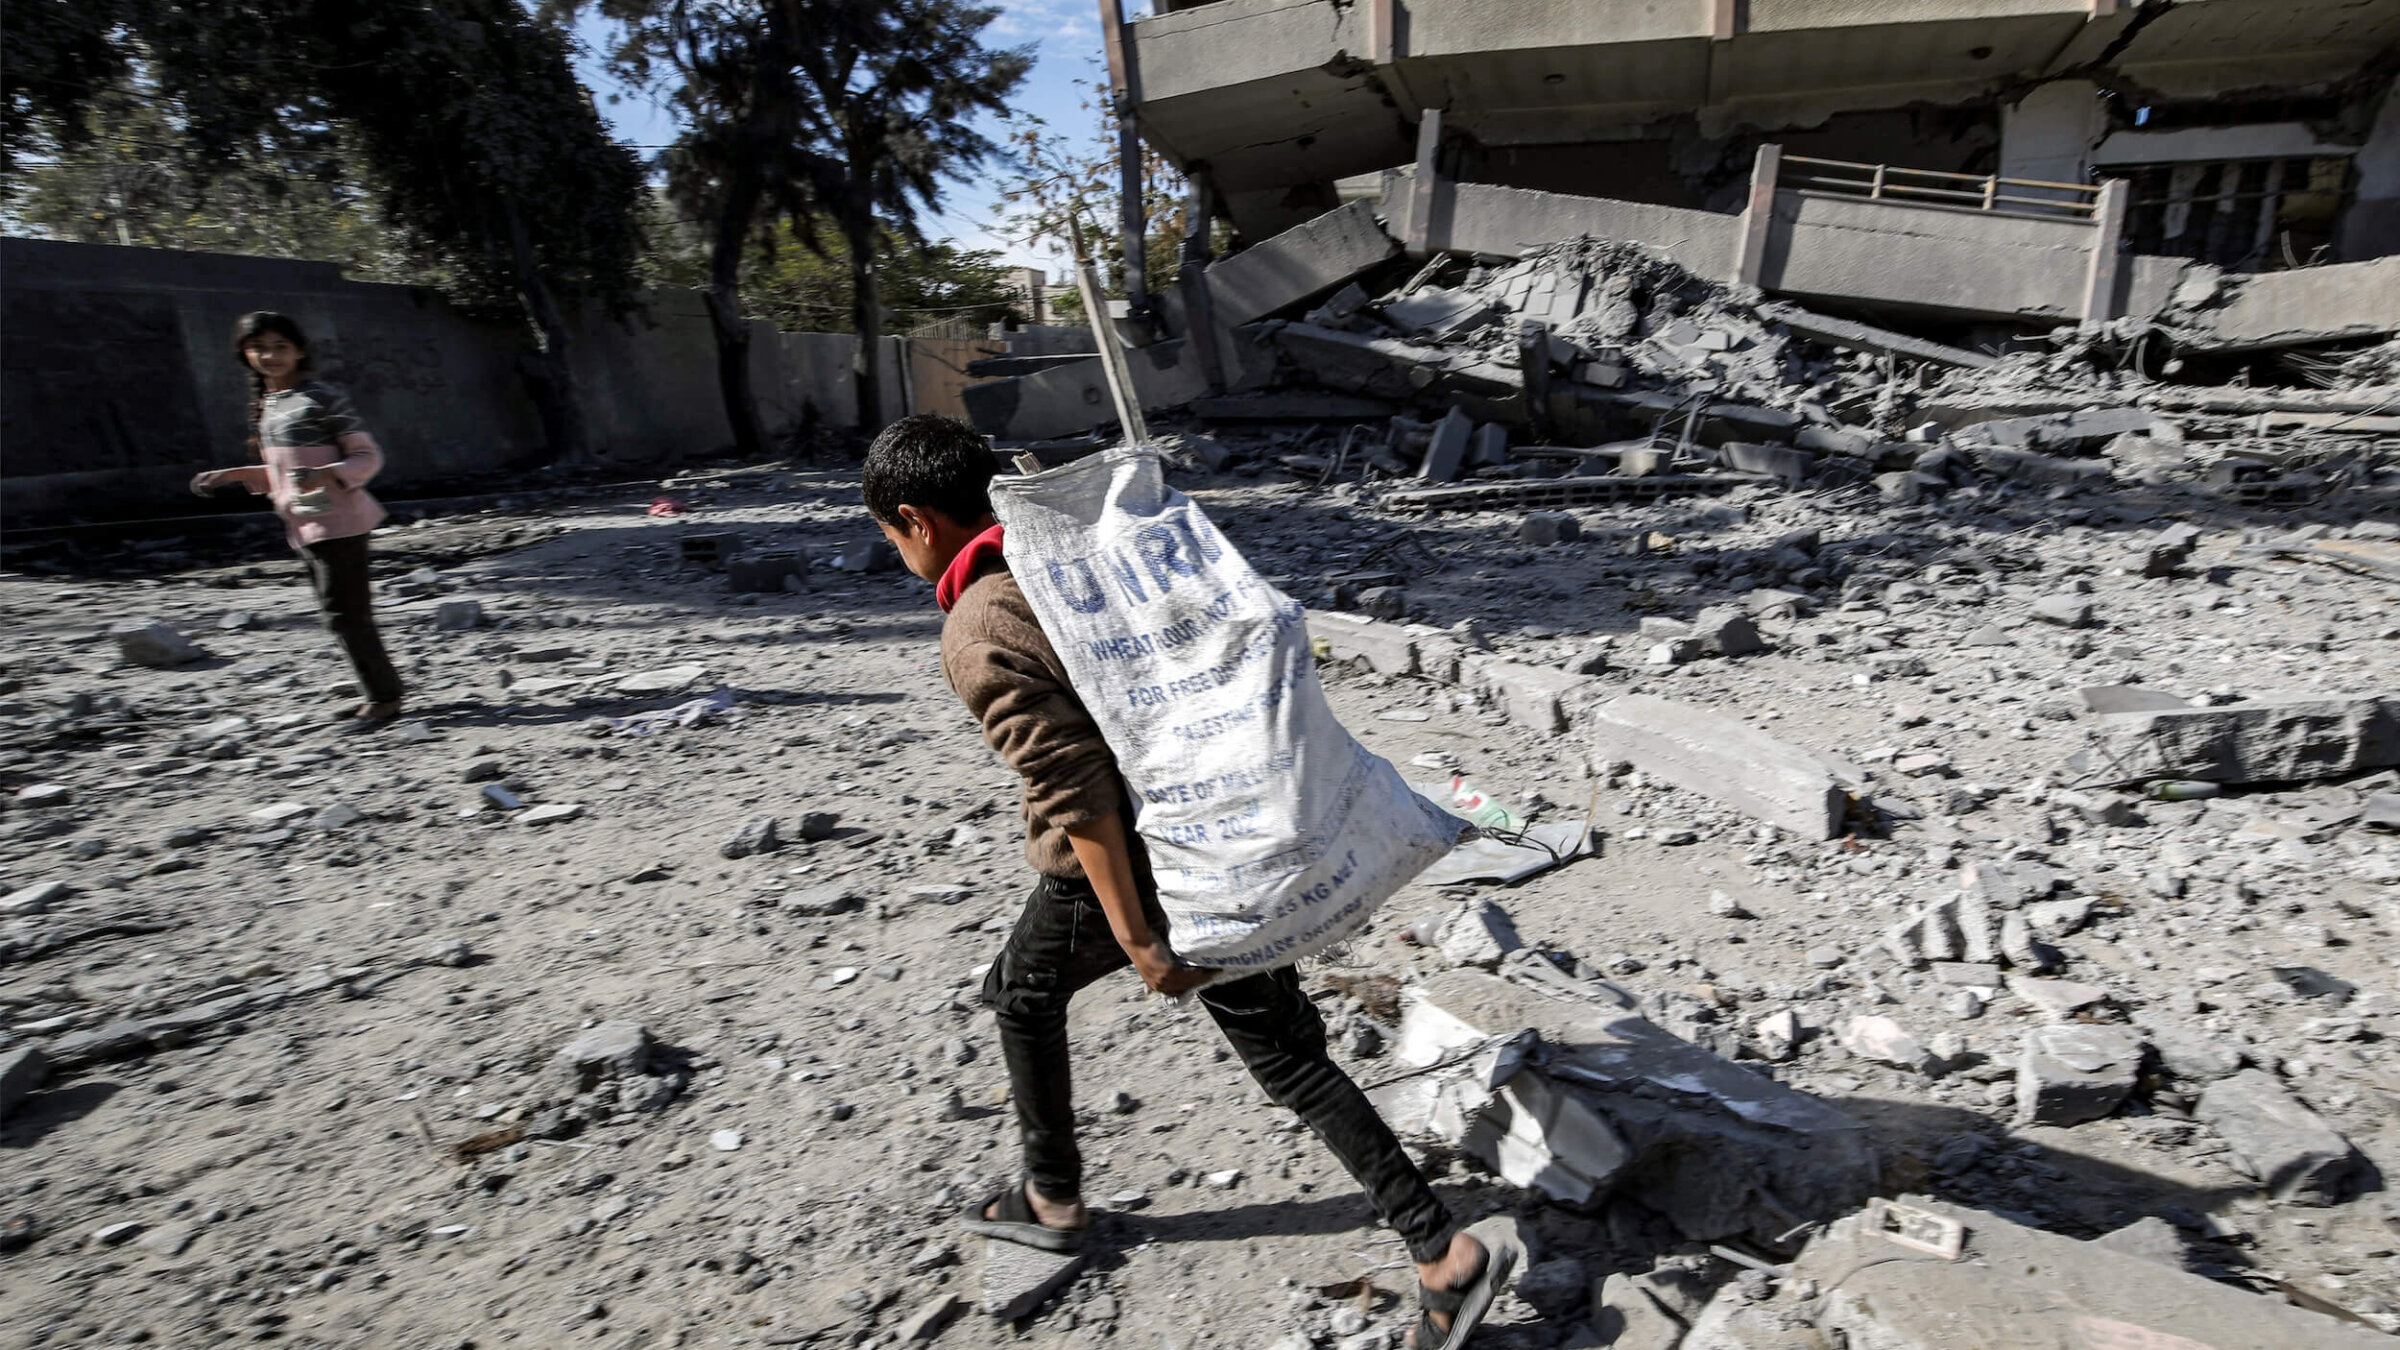 A boy carries a sack bearing the logo of the United Nations Relief and Works Agency for Palestine Refugees in the Near East (UNRWA), filled with salvaged items from the rubble of a destroyed high school in the Nuseirat camp for Palestinian refugees, which was severely damaged by Israeli bombardment on Feb. 1.